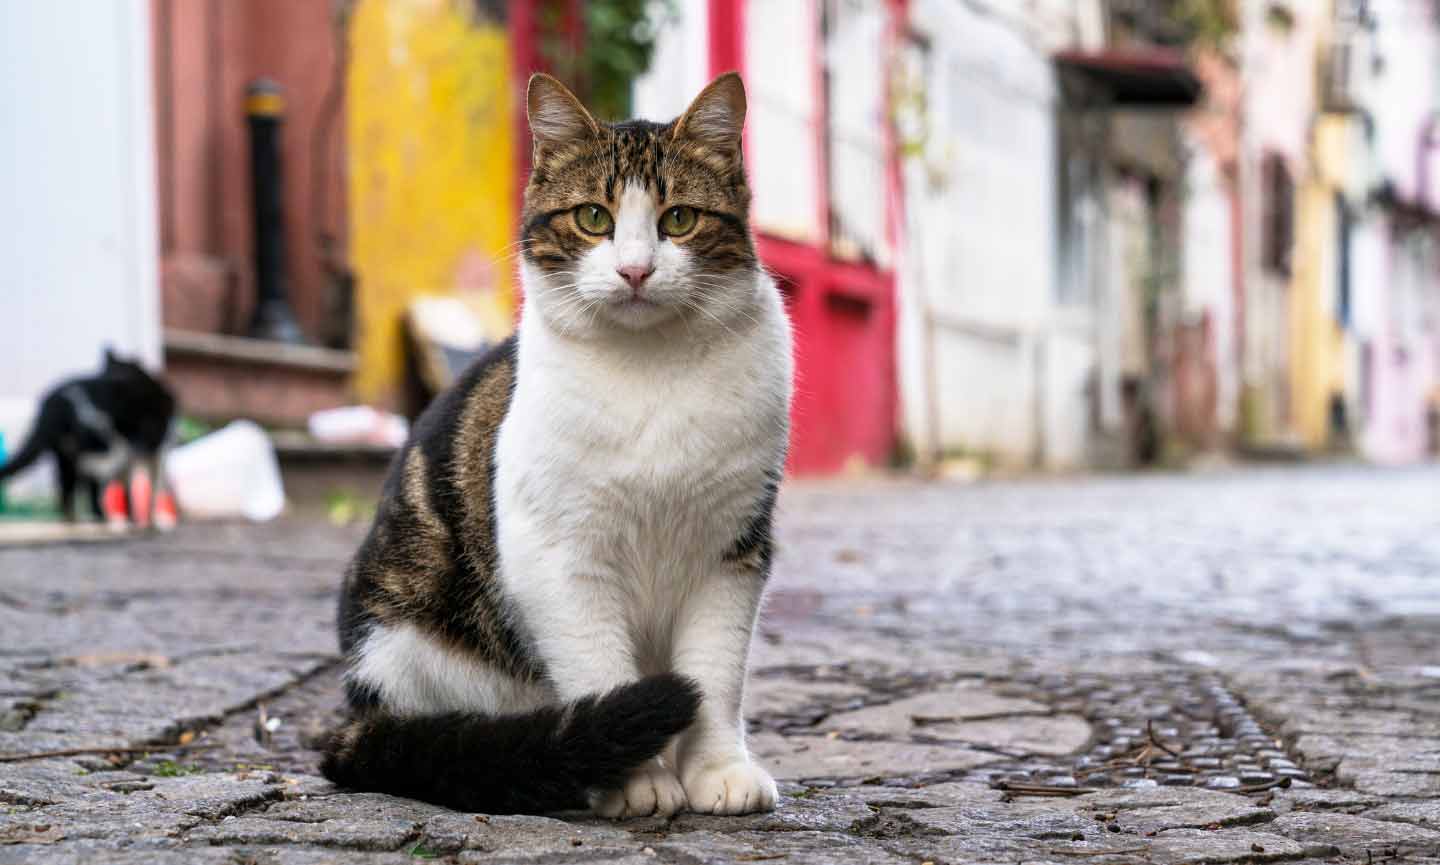 A white and brown cat sits on a cobblestone street